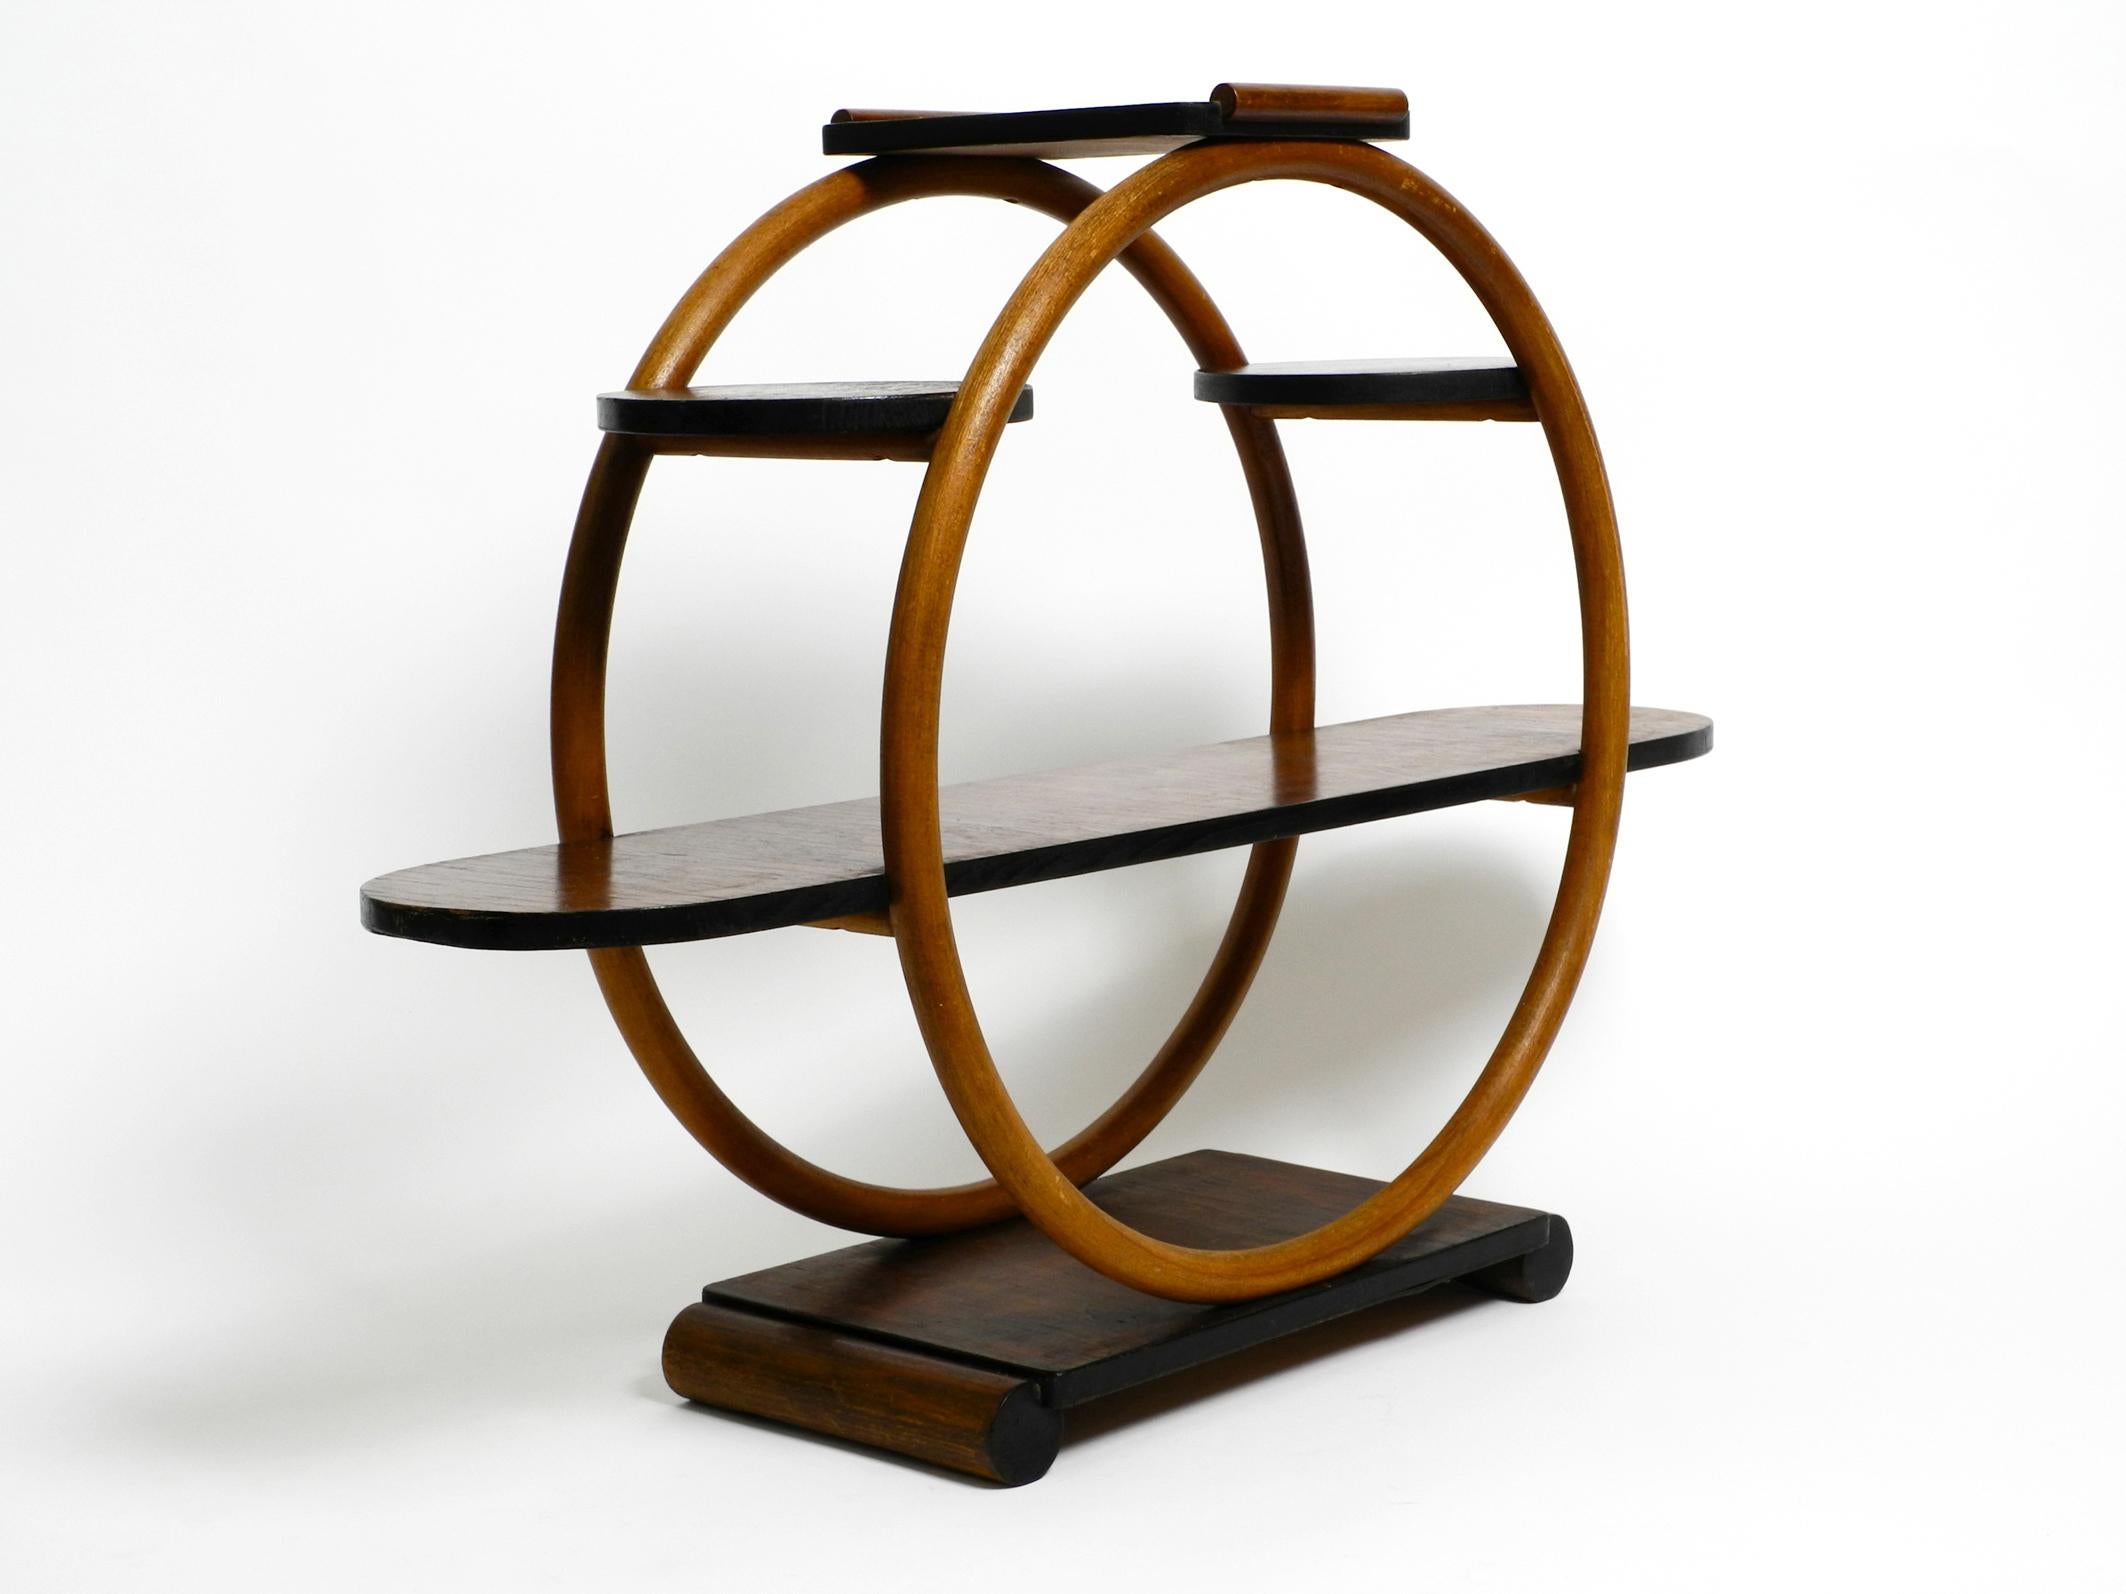 Beautiful very rare Italian Art Deco mid-century wooden shelf or plant stand.
Very unusual design Made in Italy. Probably from the 1930s.
The lateral round frames are made of bentwood.
The surfaces are made of wood with dark walnut veneer. The